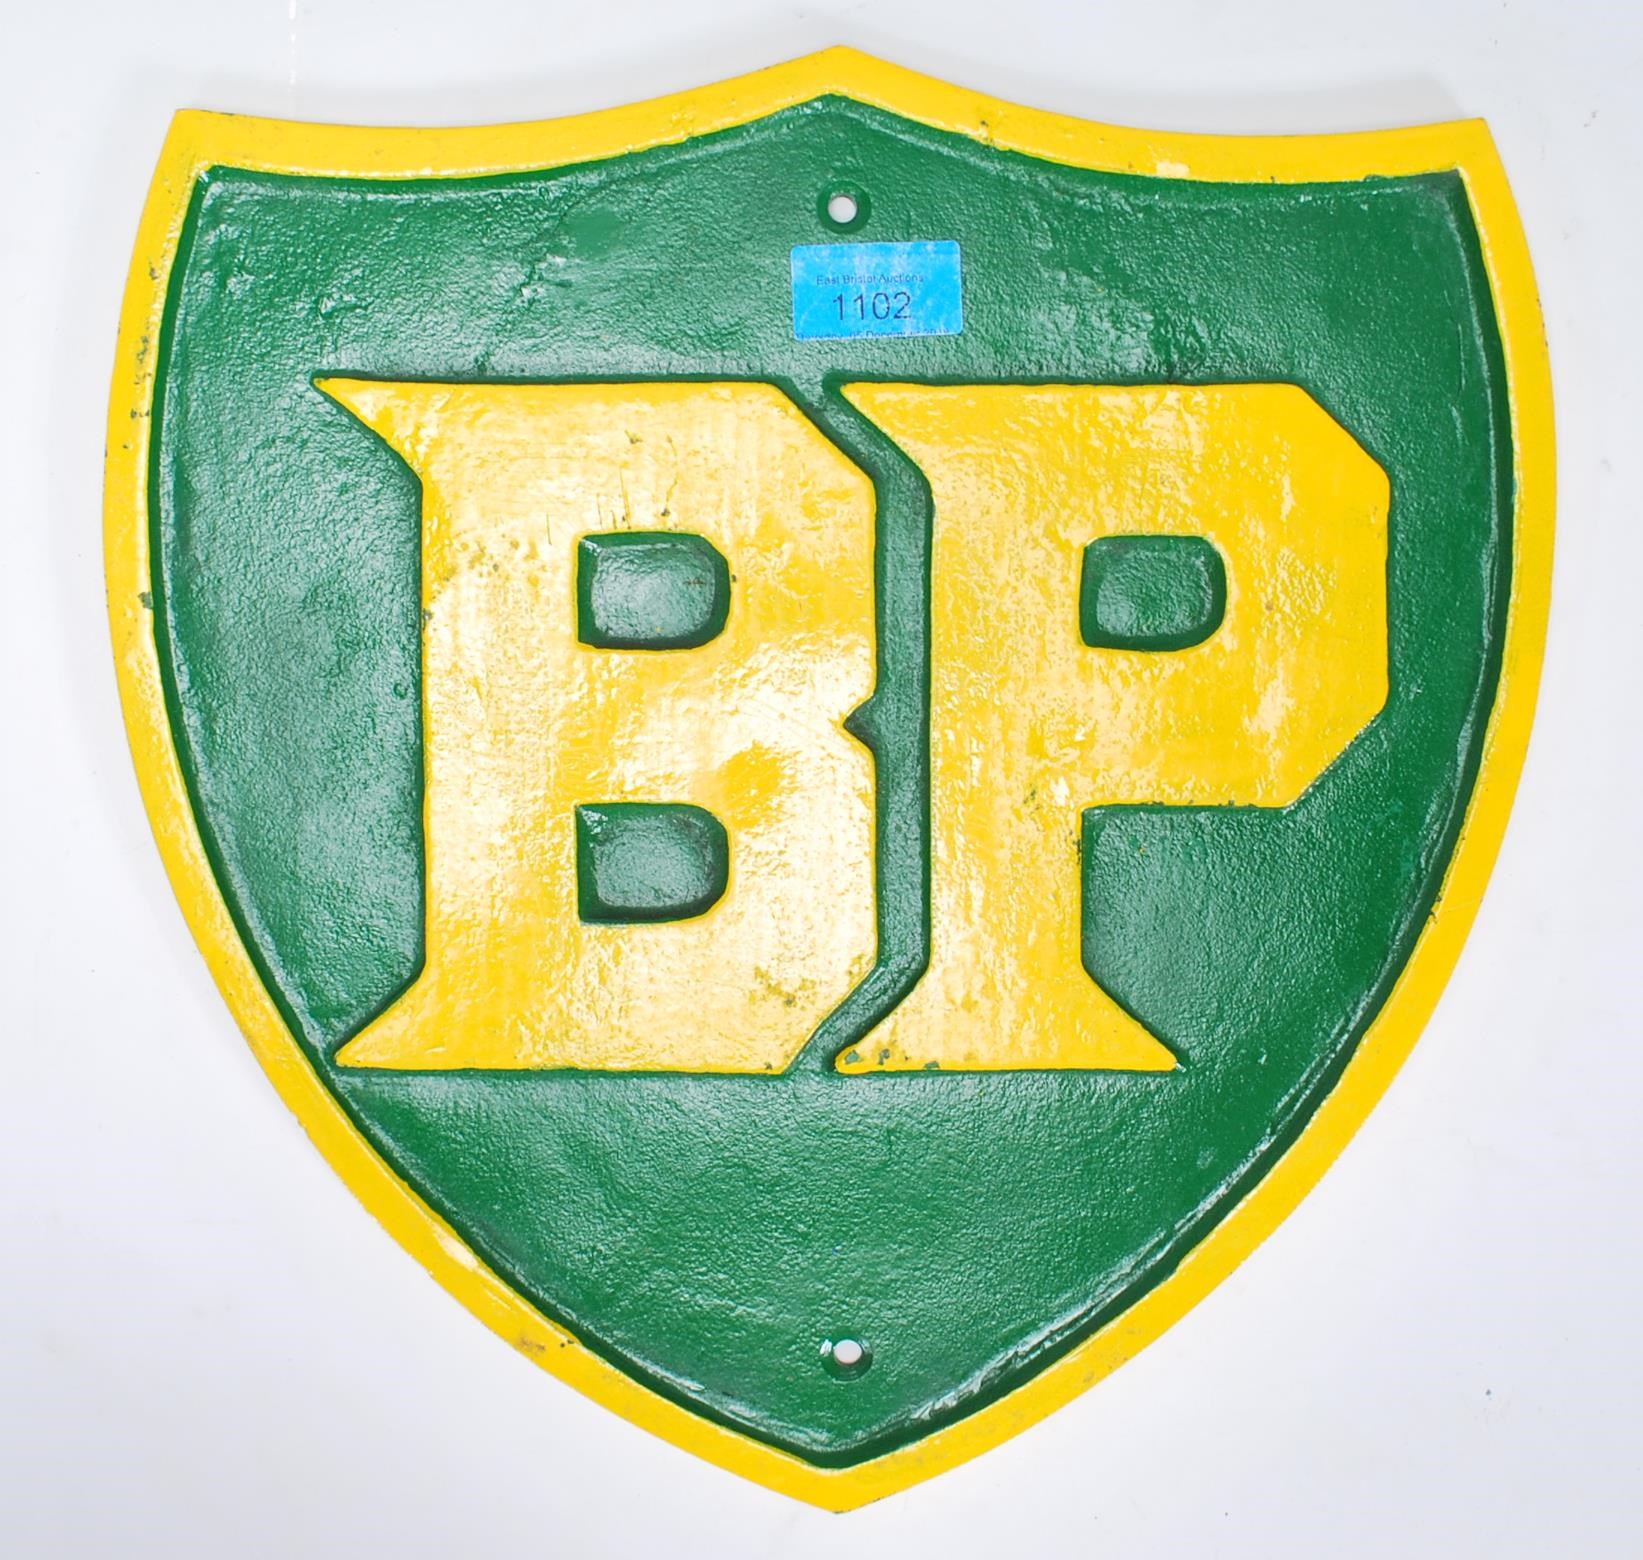 A vintage 20th Century cast iron BP reproduction advertising sign of shield form having a green